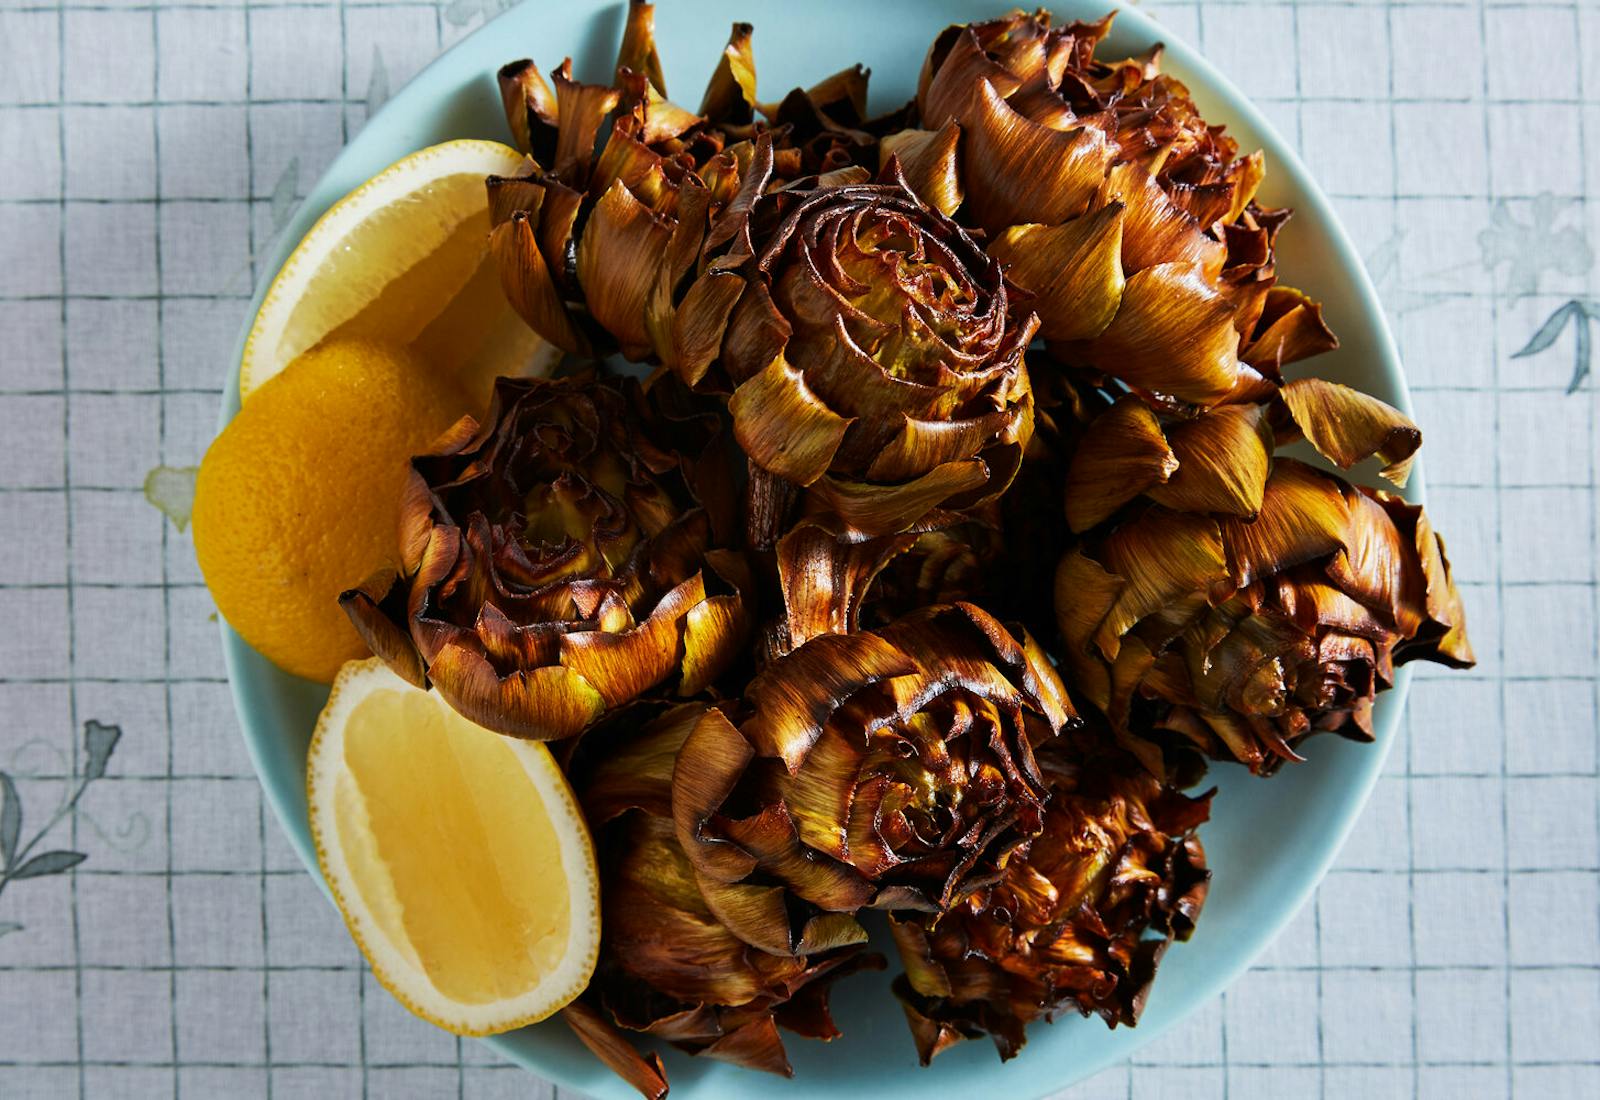 Fried artichokes with lemon wedges in blue bowl, atop grid-patterned tablecloth.